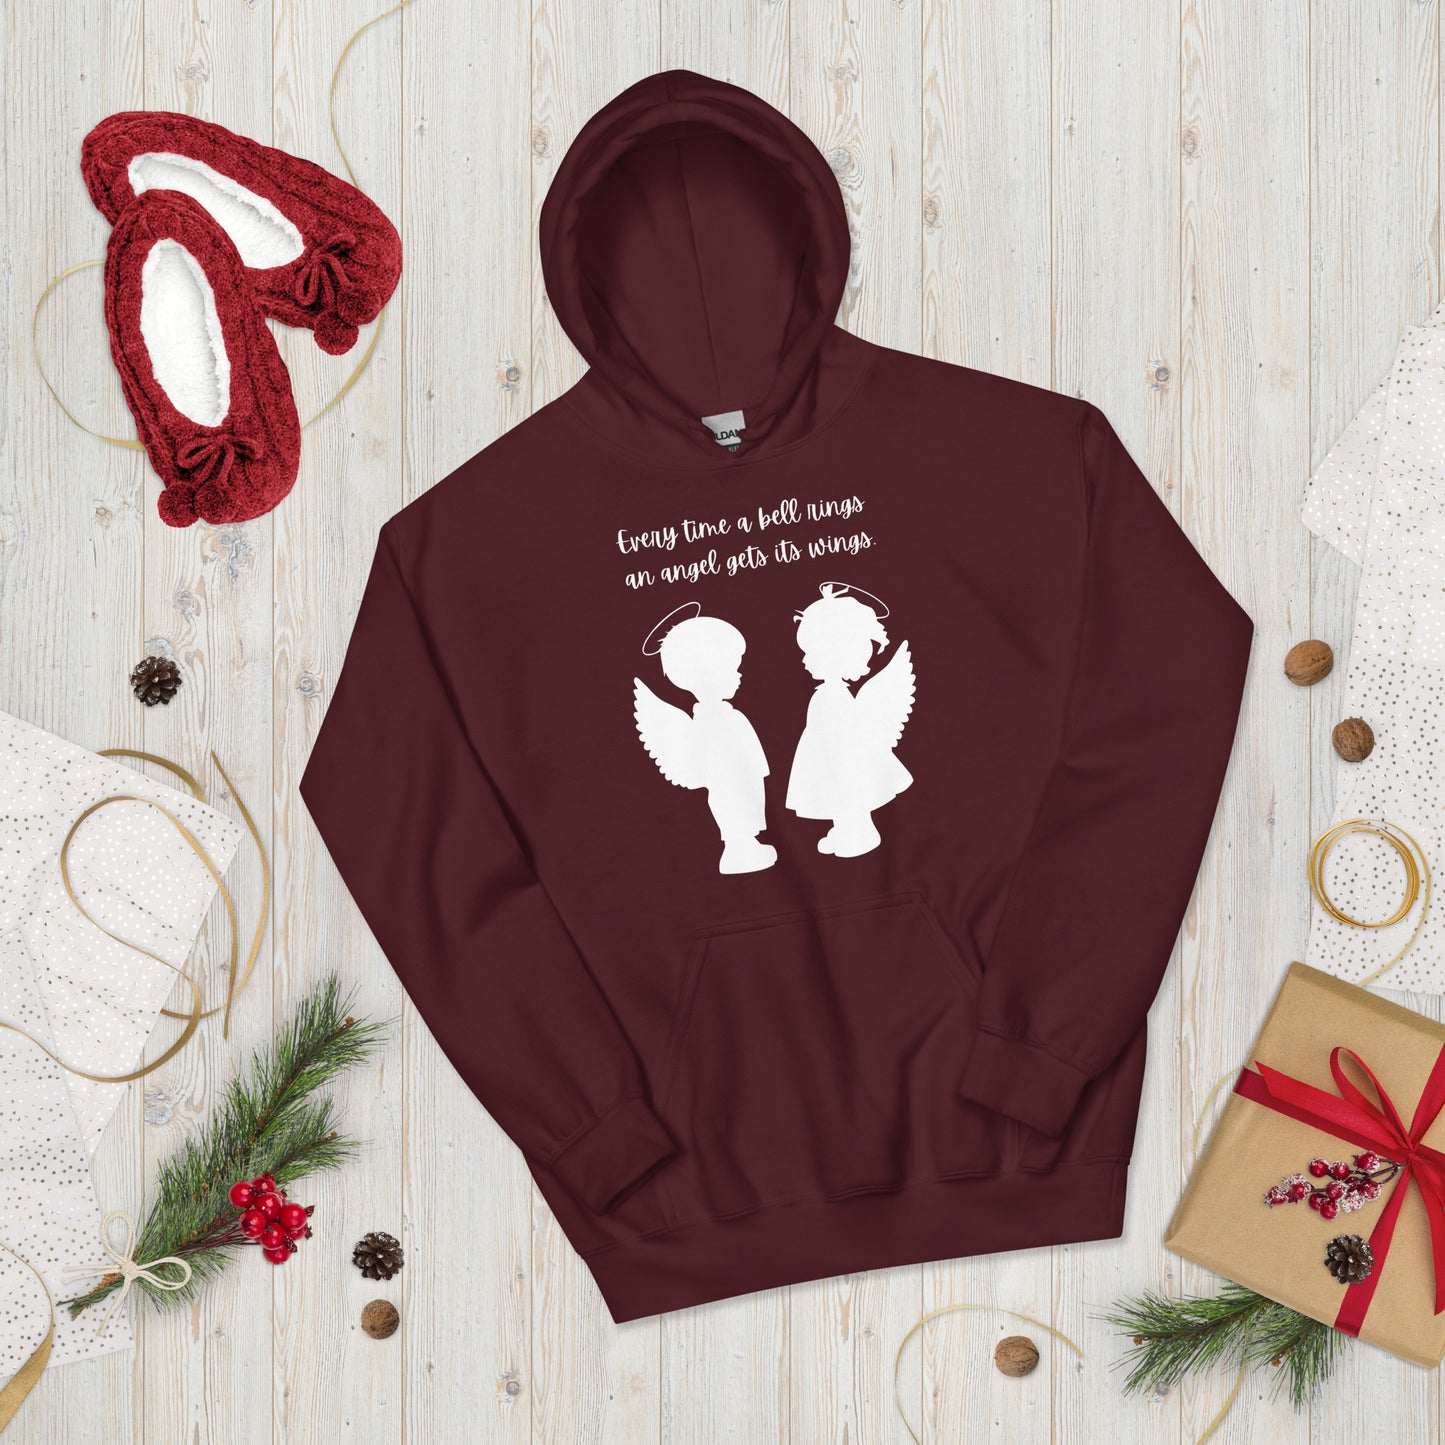 Every Time a Bell Rings an Angel Gets Its Wings, Unisex Hoodie, It’s a Wonderful Life, Inspirational Christmas Message